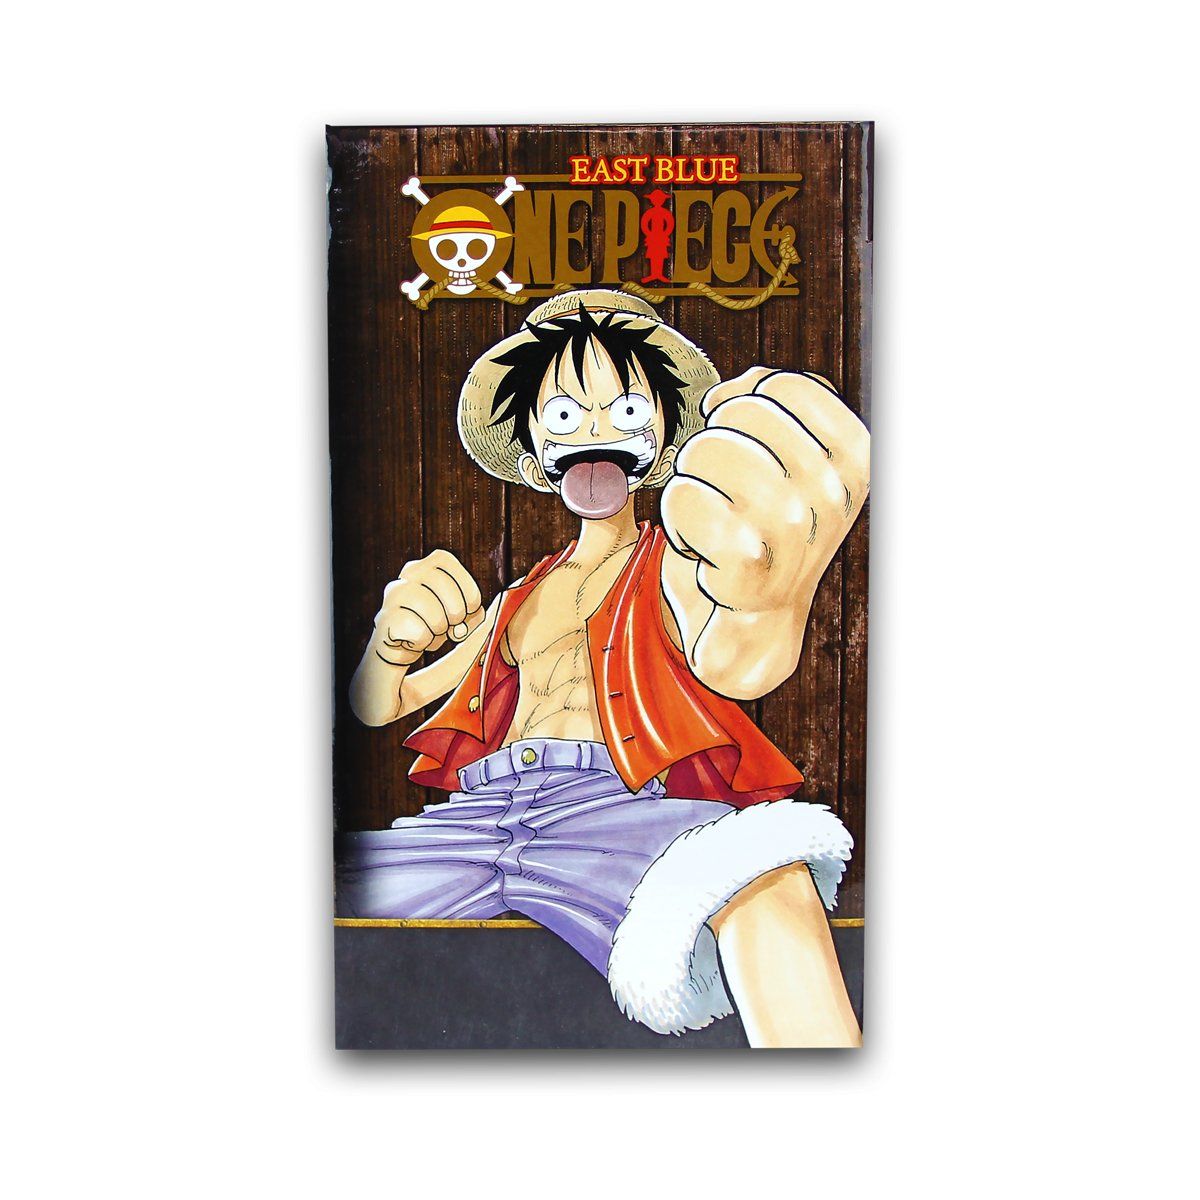 One Piece by Eiichiro Oda Box Set 1: East Blue and Baroque Works Vol. 1-23 23 Books - Ages 14+ - Paperback